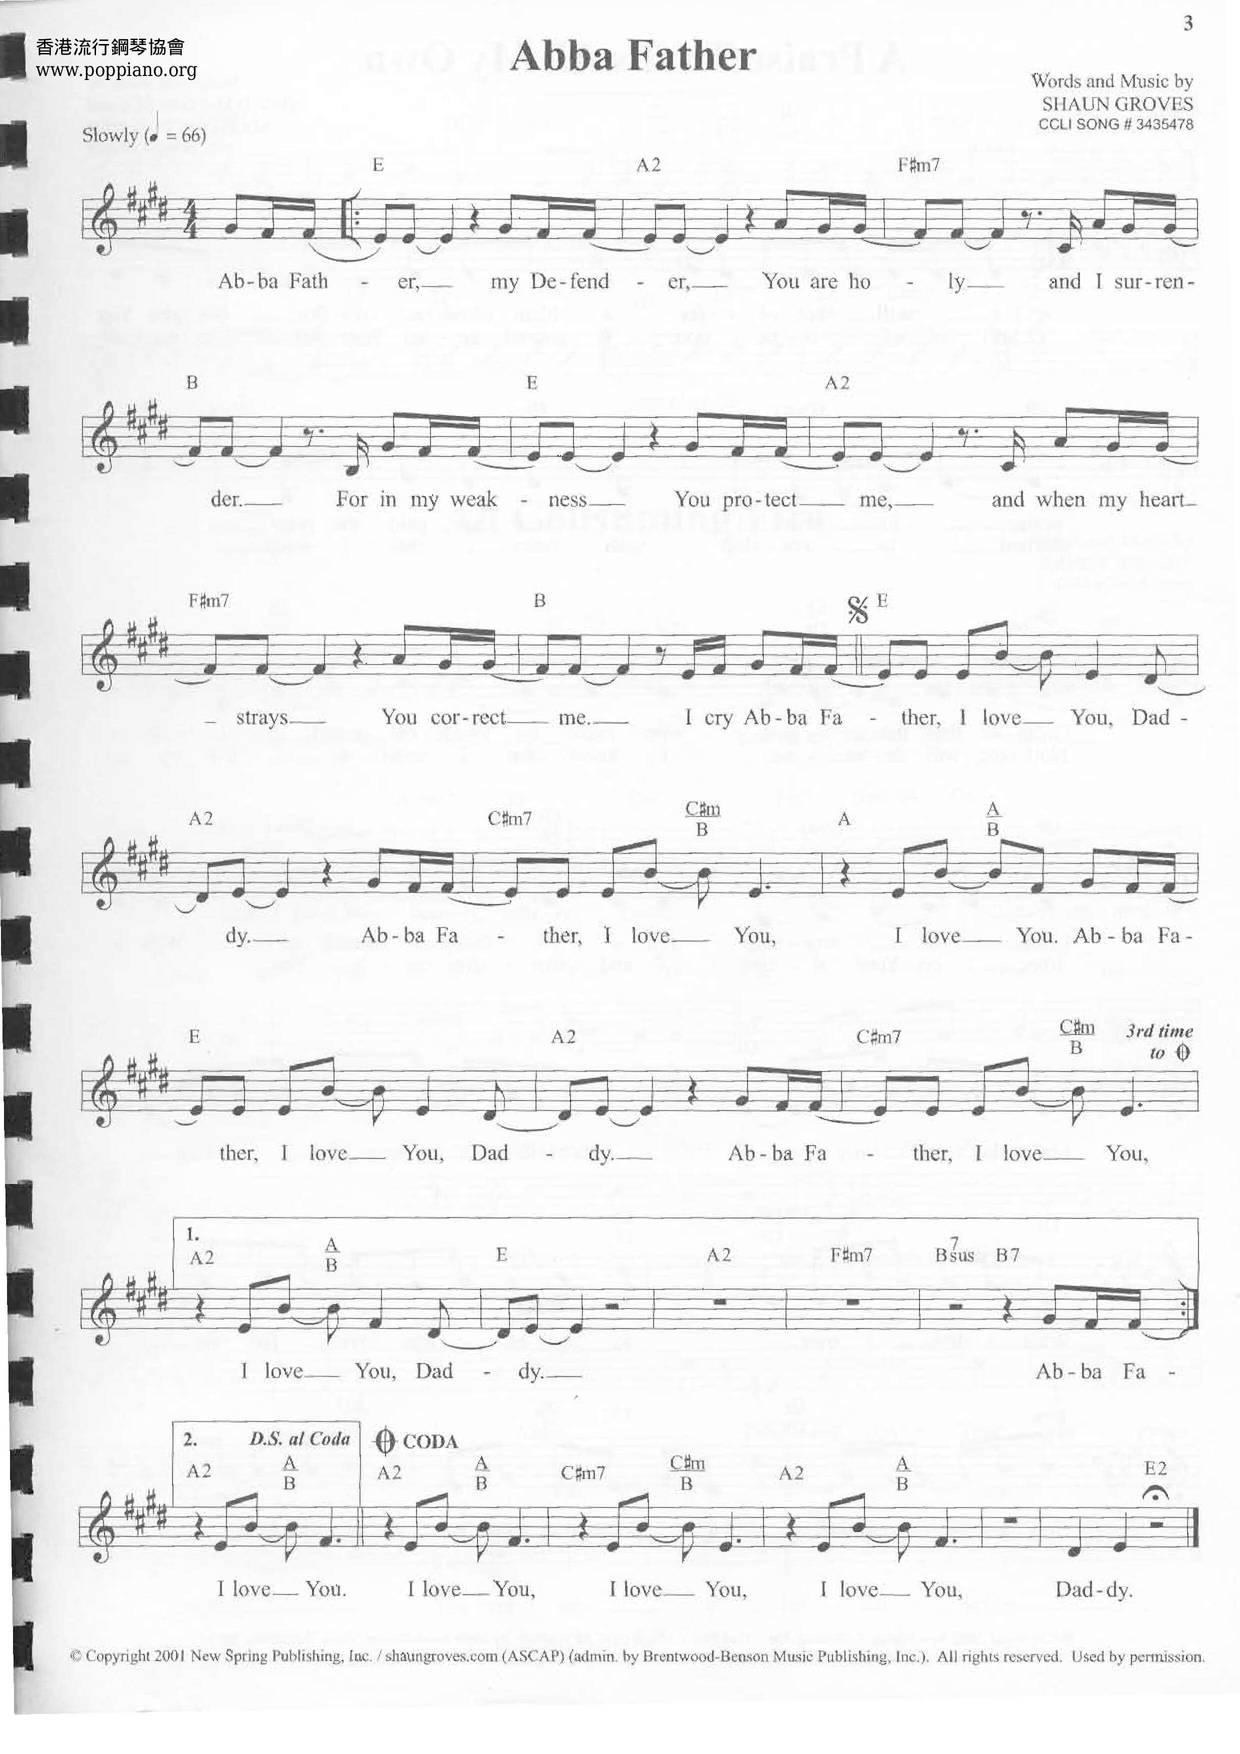 Praise & Worship Songbook 62 Pages Score